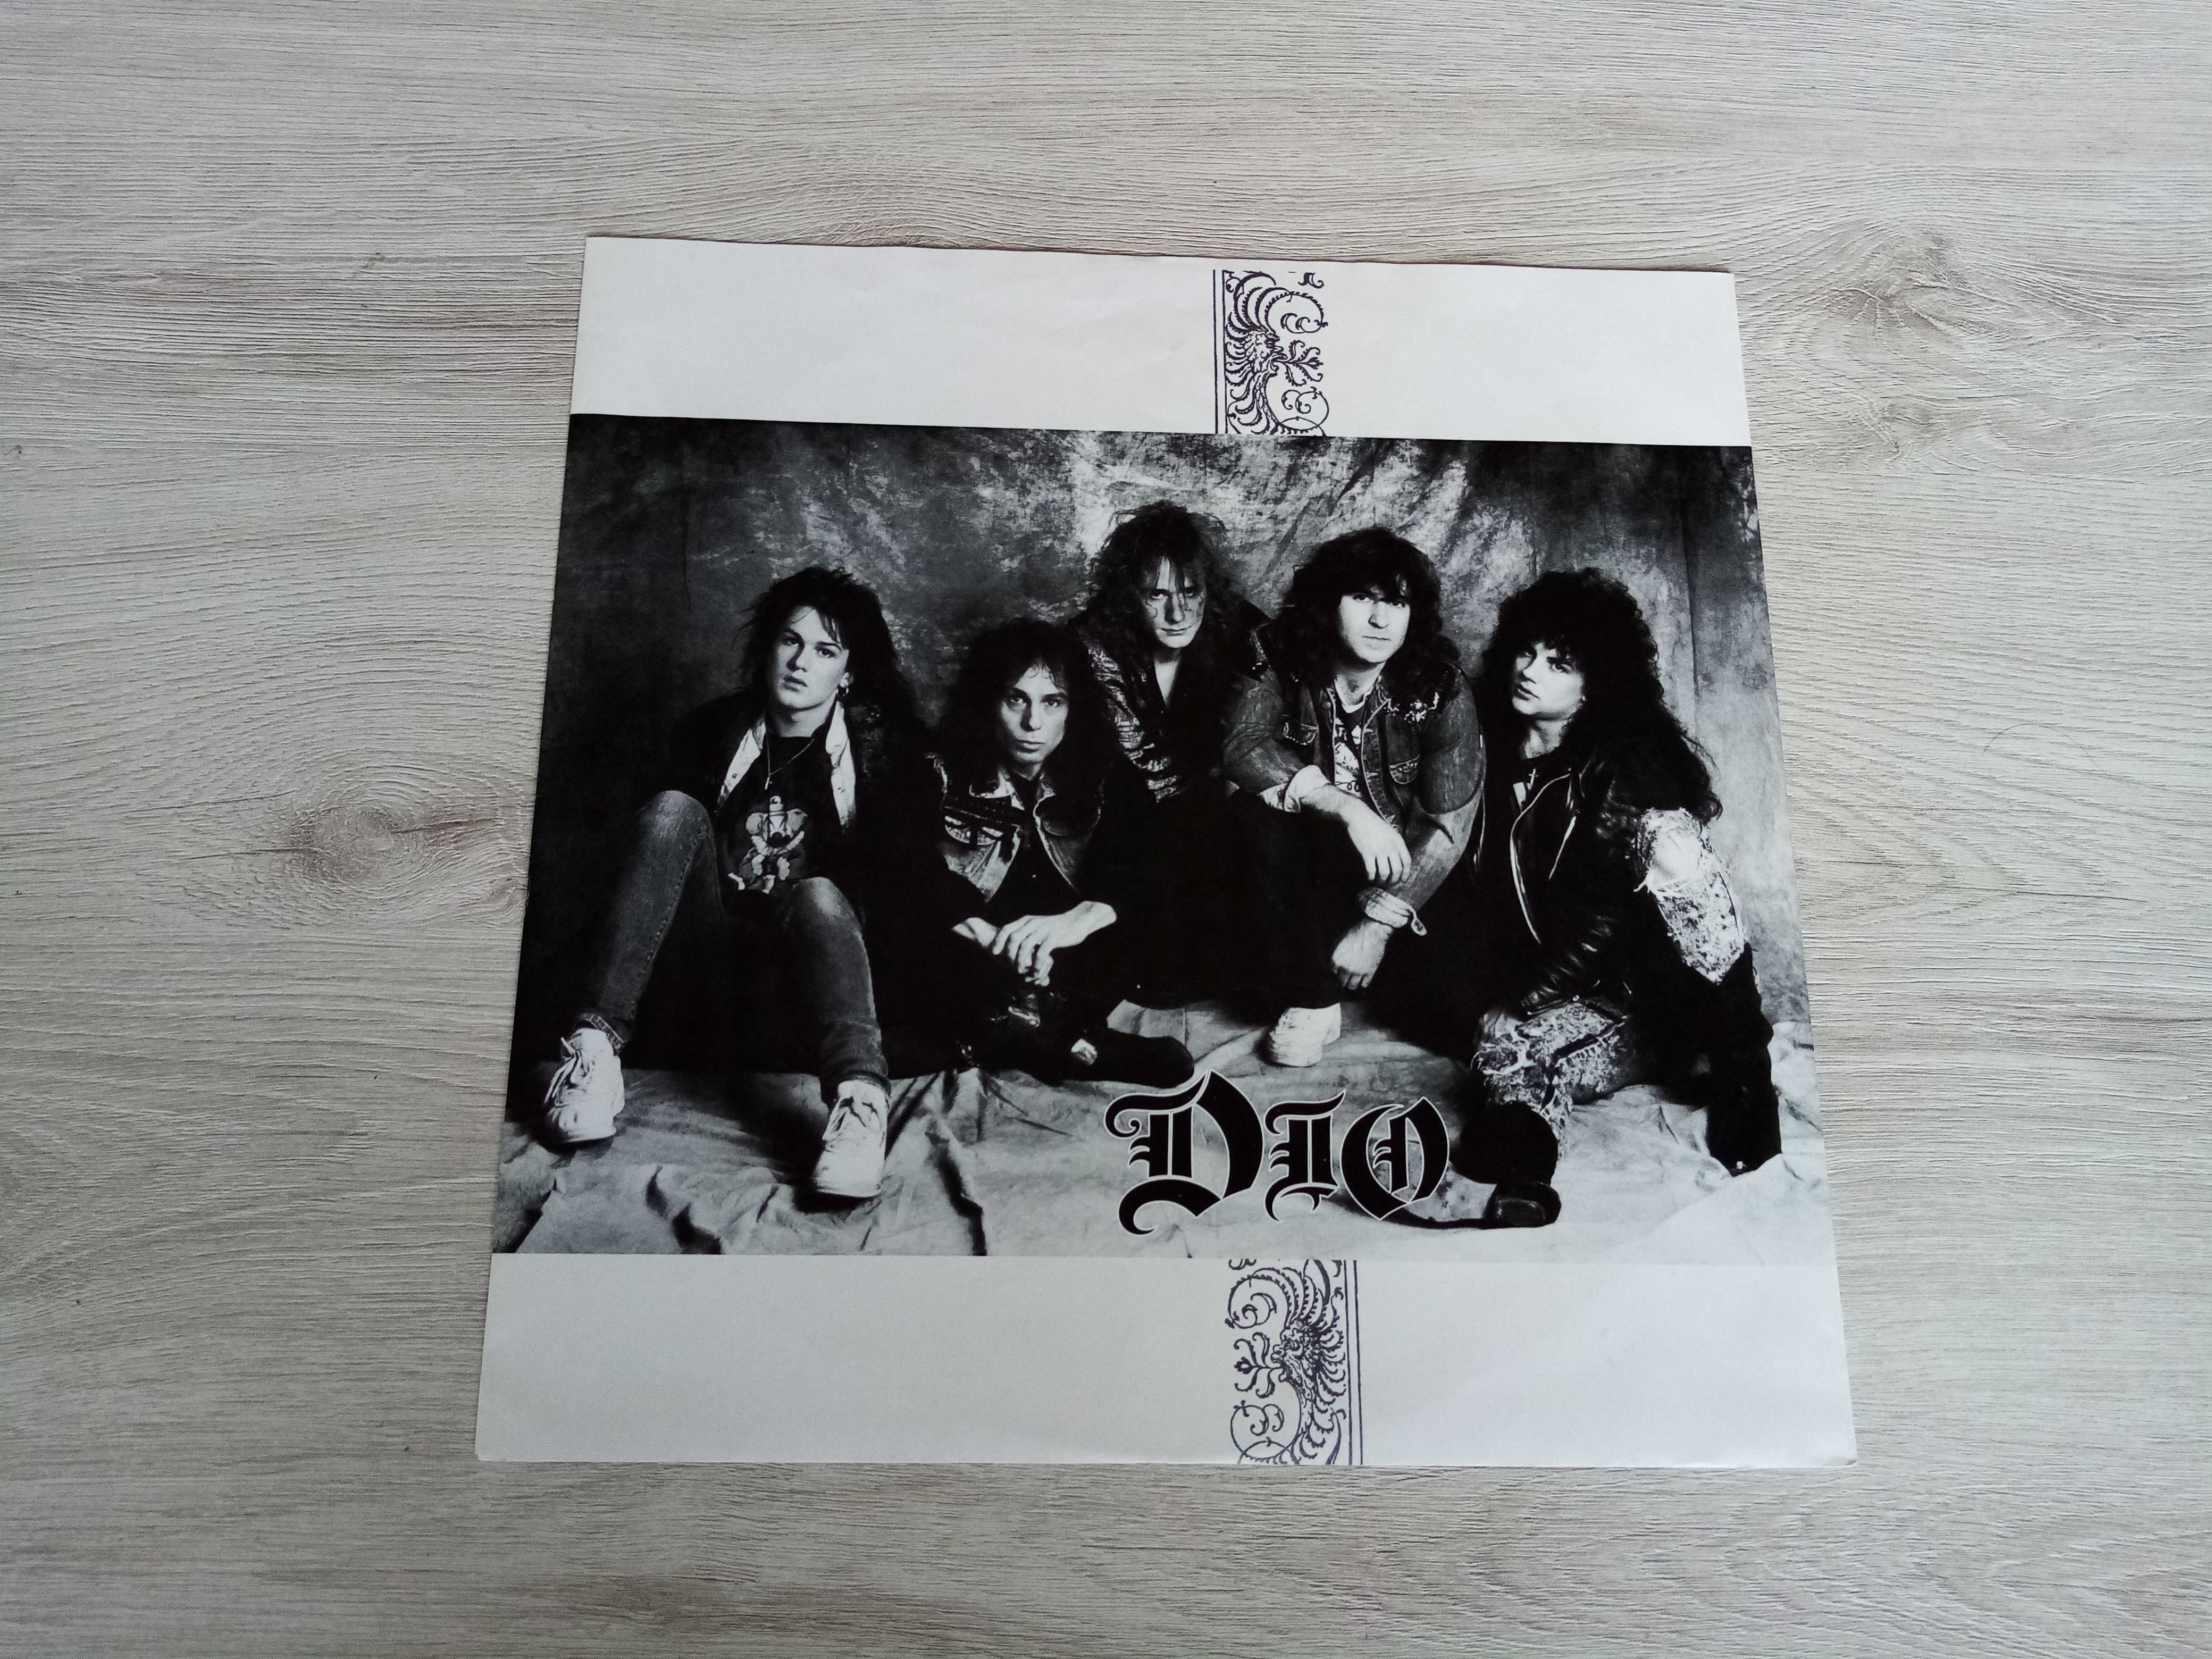 Dio  Lock Up The Wolves  LP WINYL